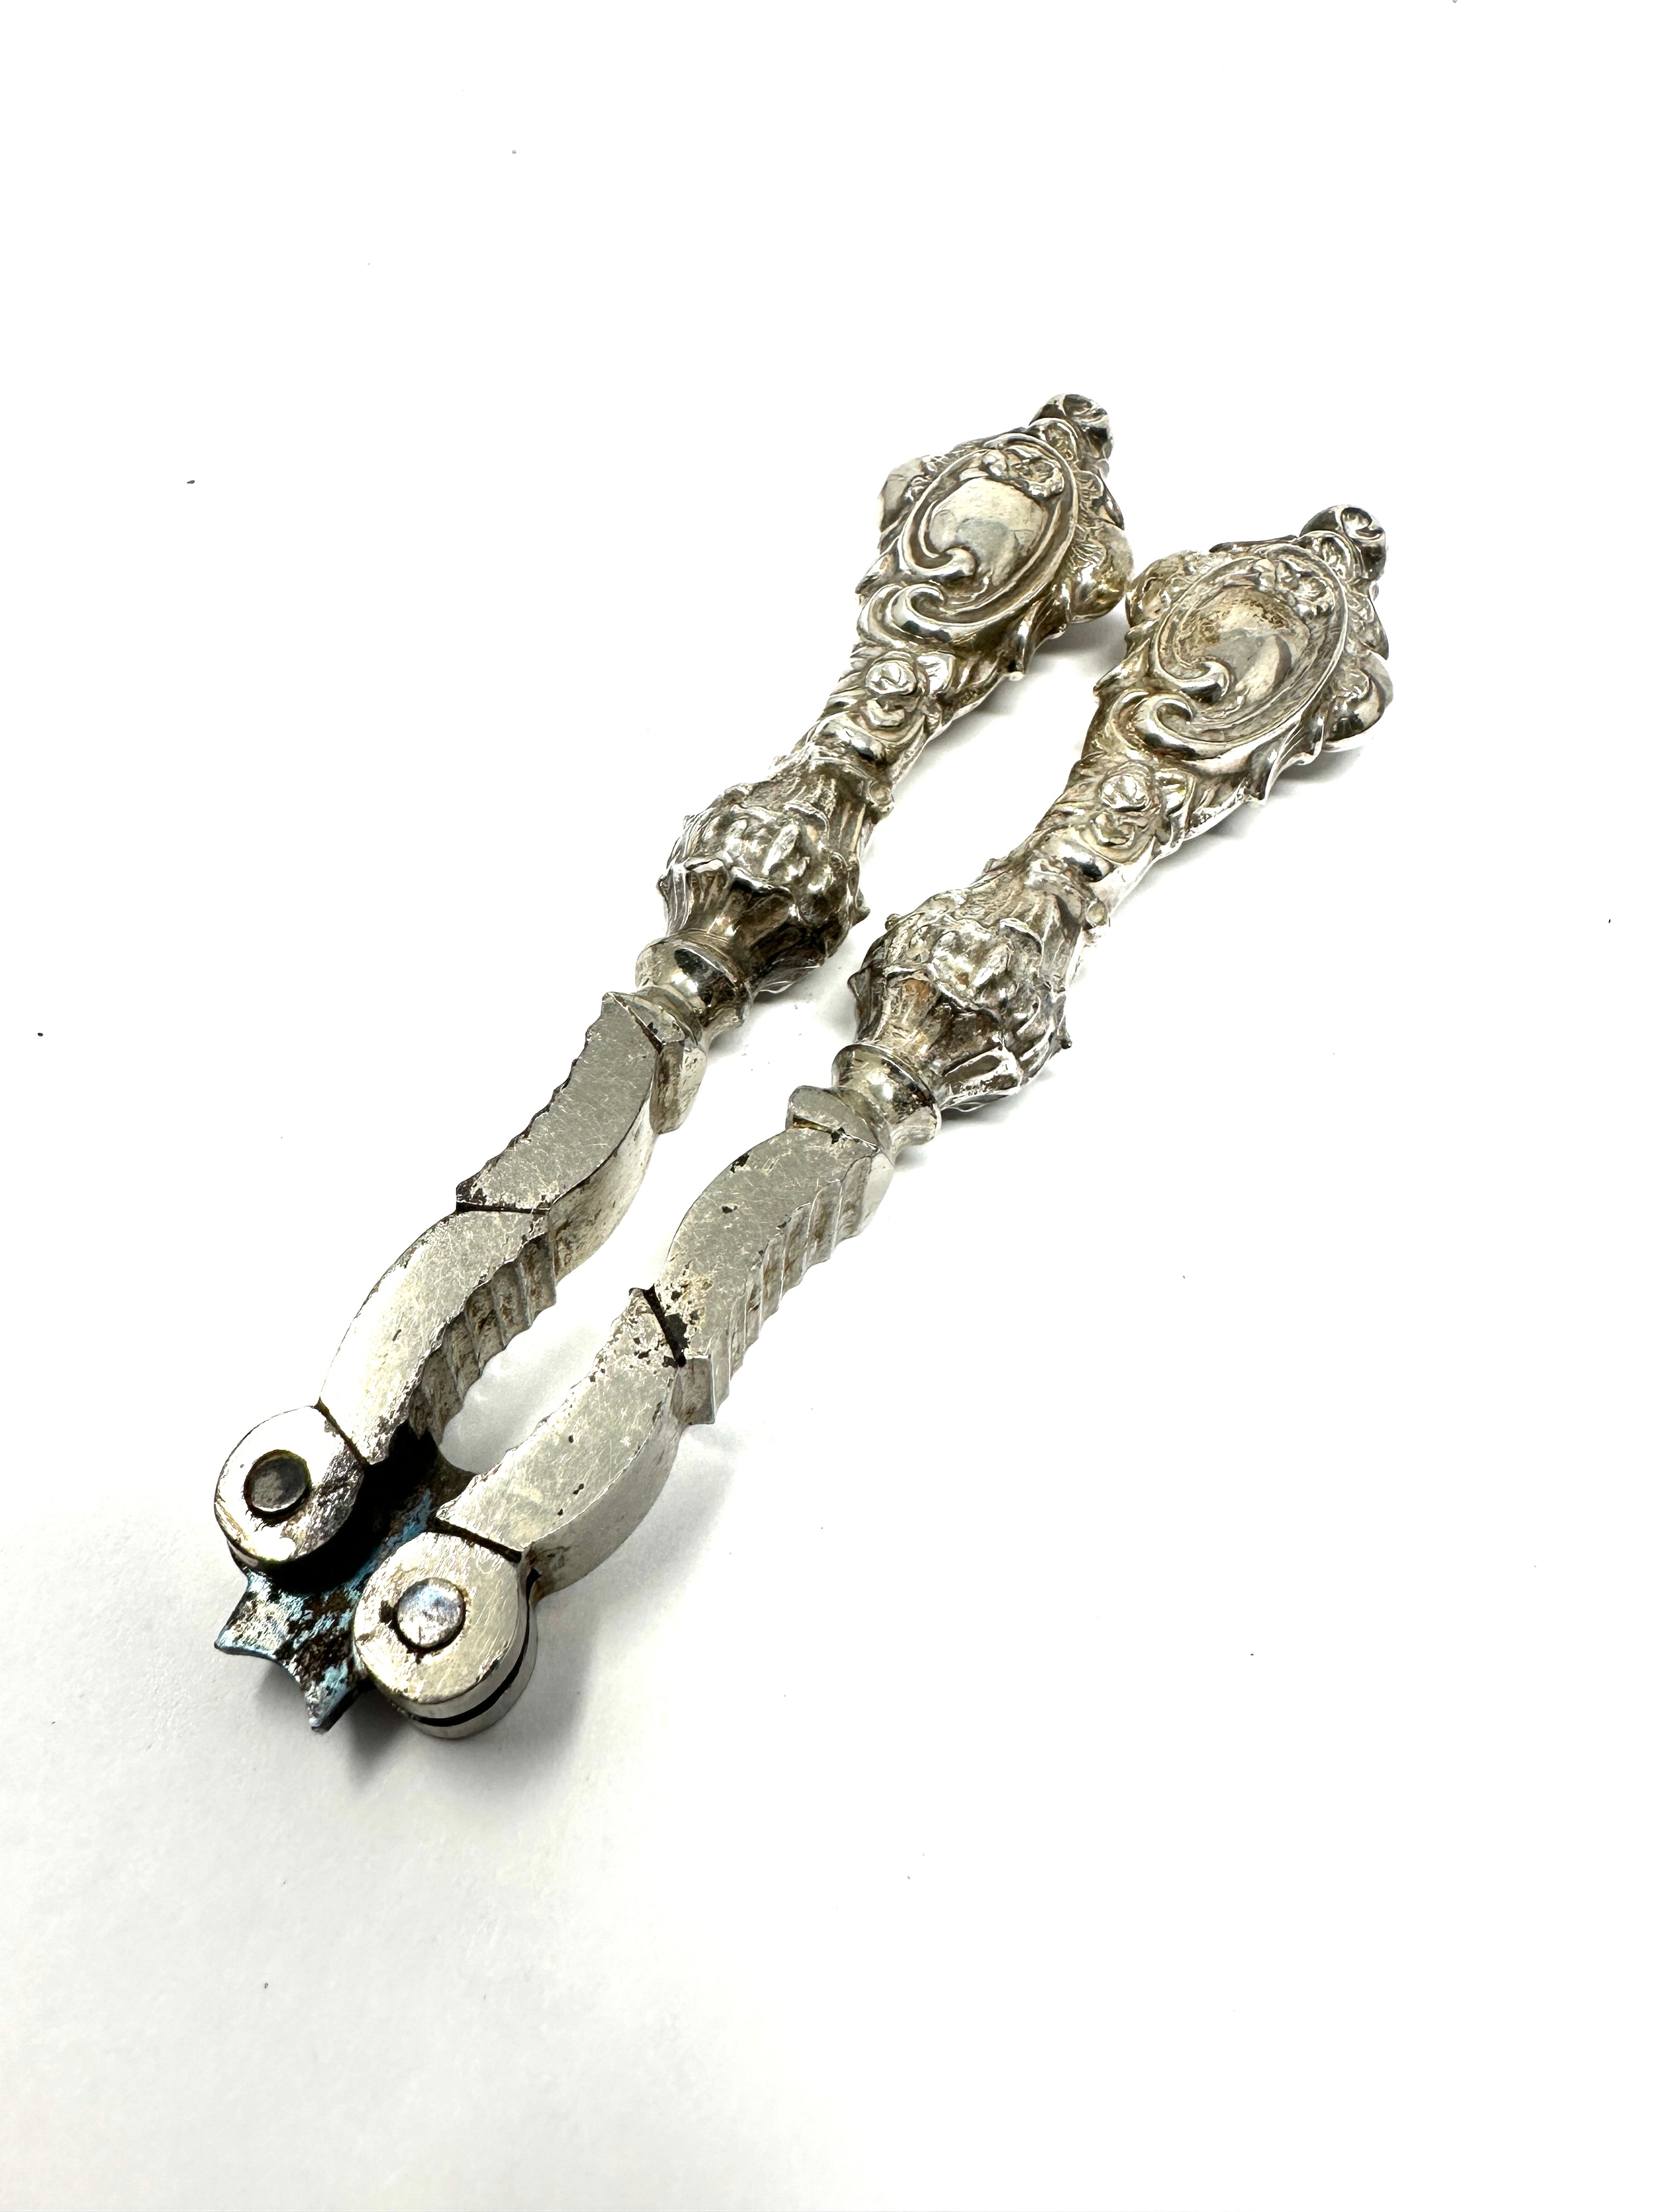 Antique silver hallmarked handle nut crackers - Image 2 of 3